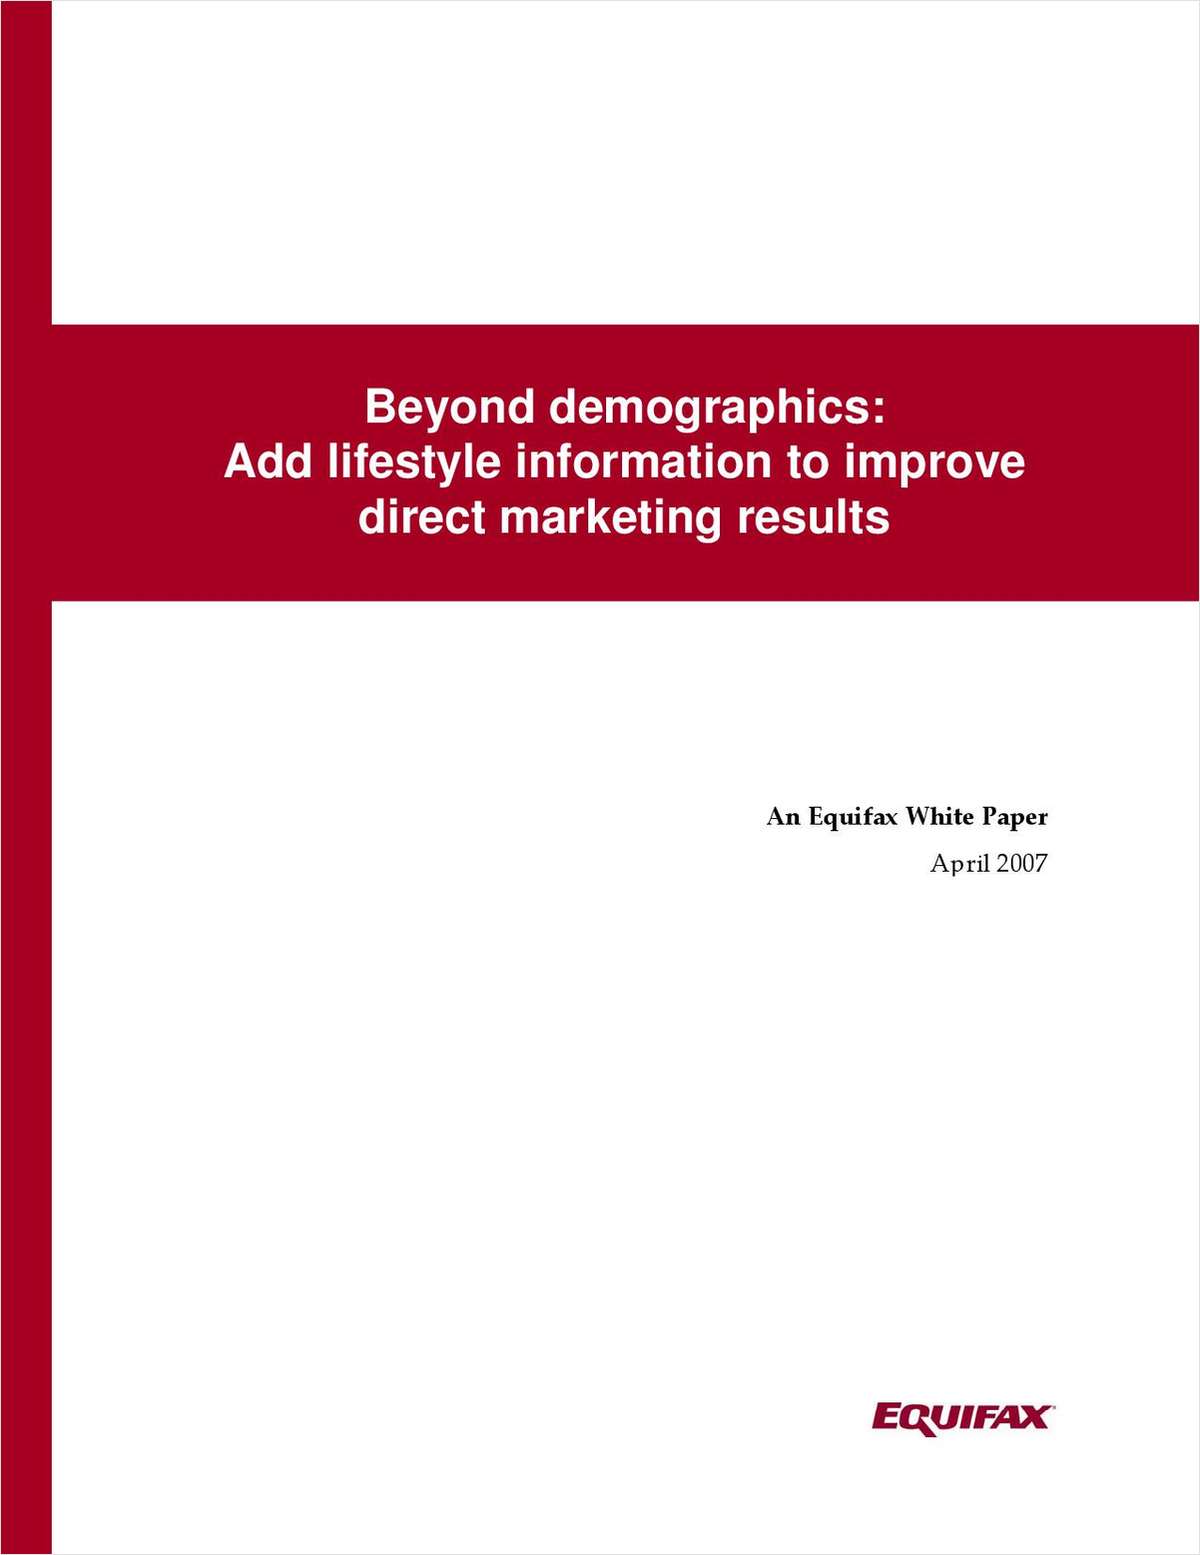 Beyond Demographics: Add Lifestyle Information to Improve Direct Marketing Results